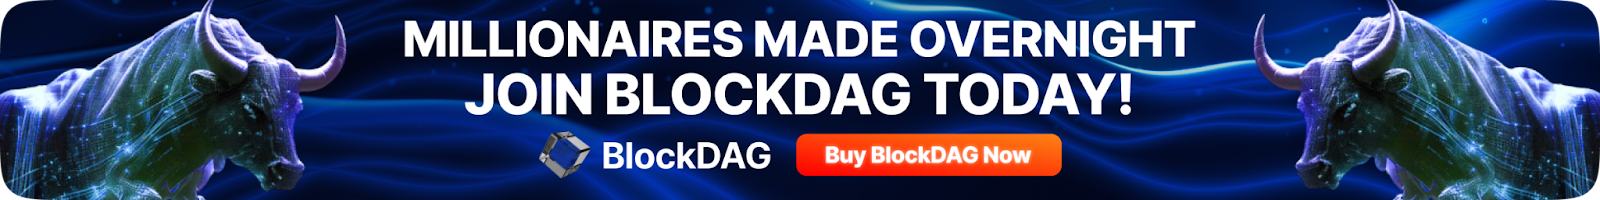 BlockDAG’s Innovative Dashboard Upgrade & X10 Miner: Redefining Standards Amidst Toncoin and GameFi Frenzy